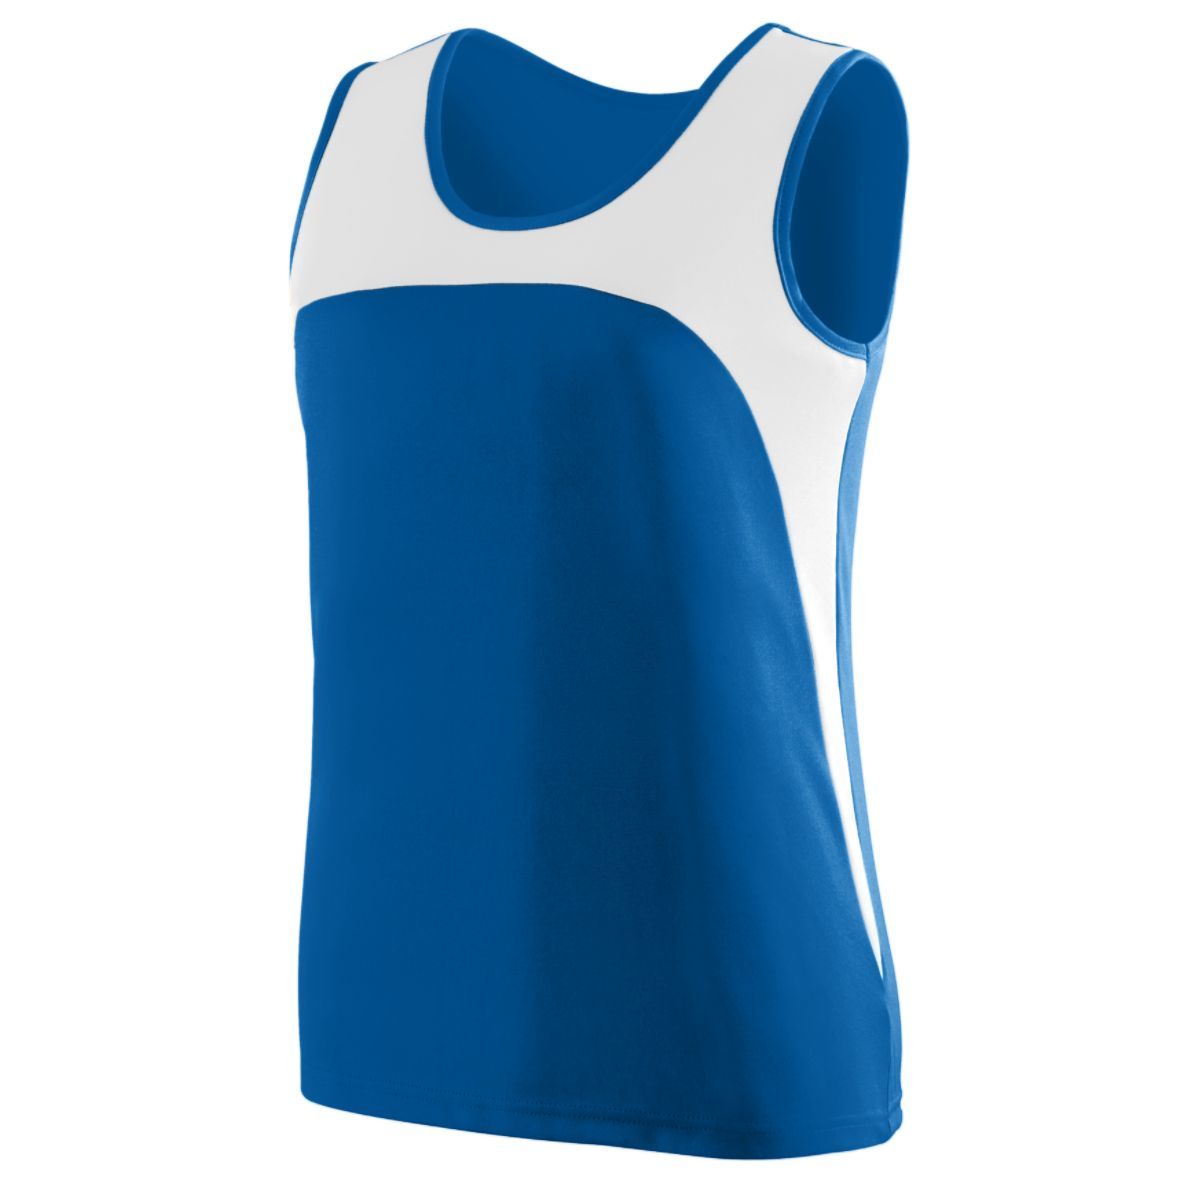 Augusta Sportswear Ladies Rapidpace Track Jersey in Royal/White  -Part of the Ladies, Ladies-Jersey, Augusta-Products, Track-Field, Shirts product lines at KanaleyCreations.com